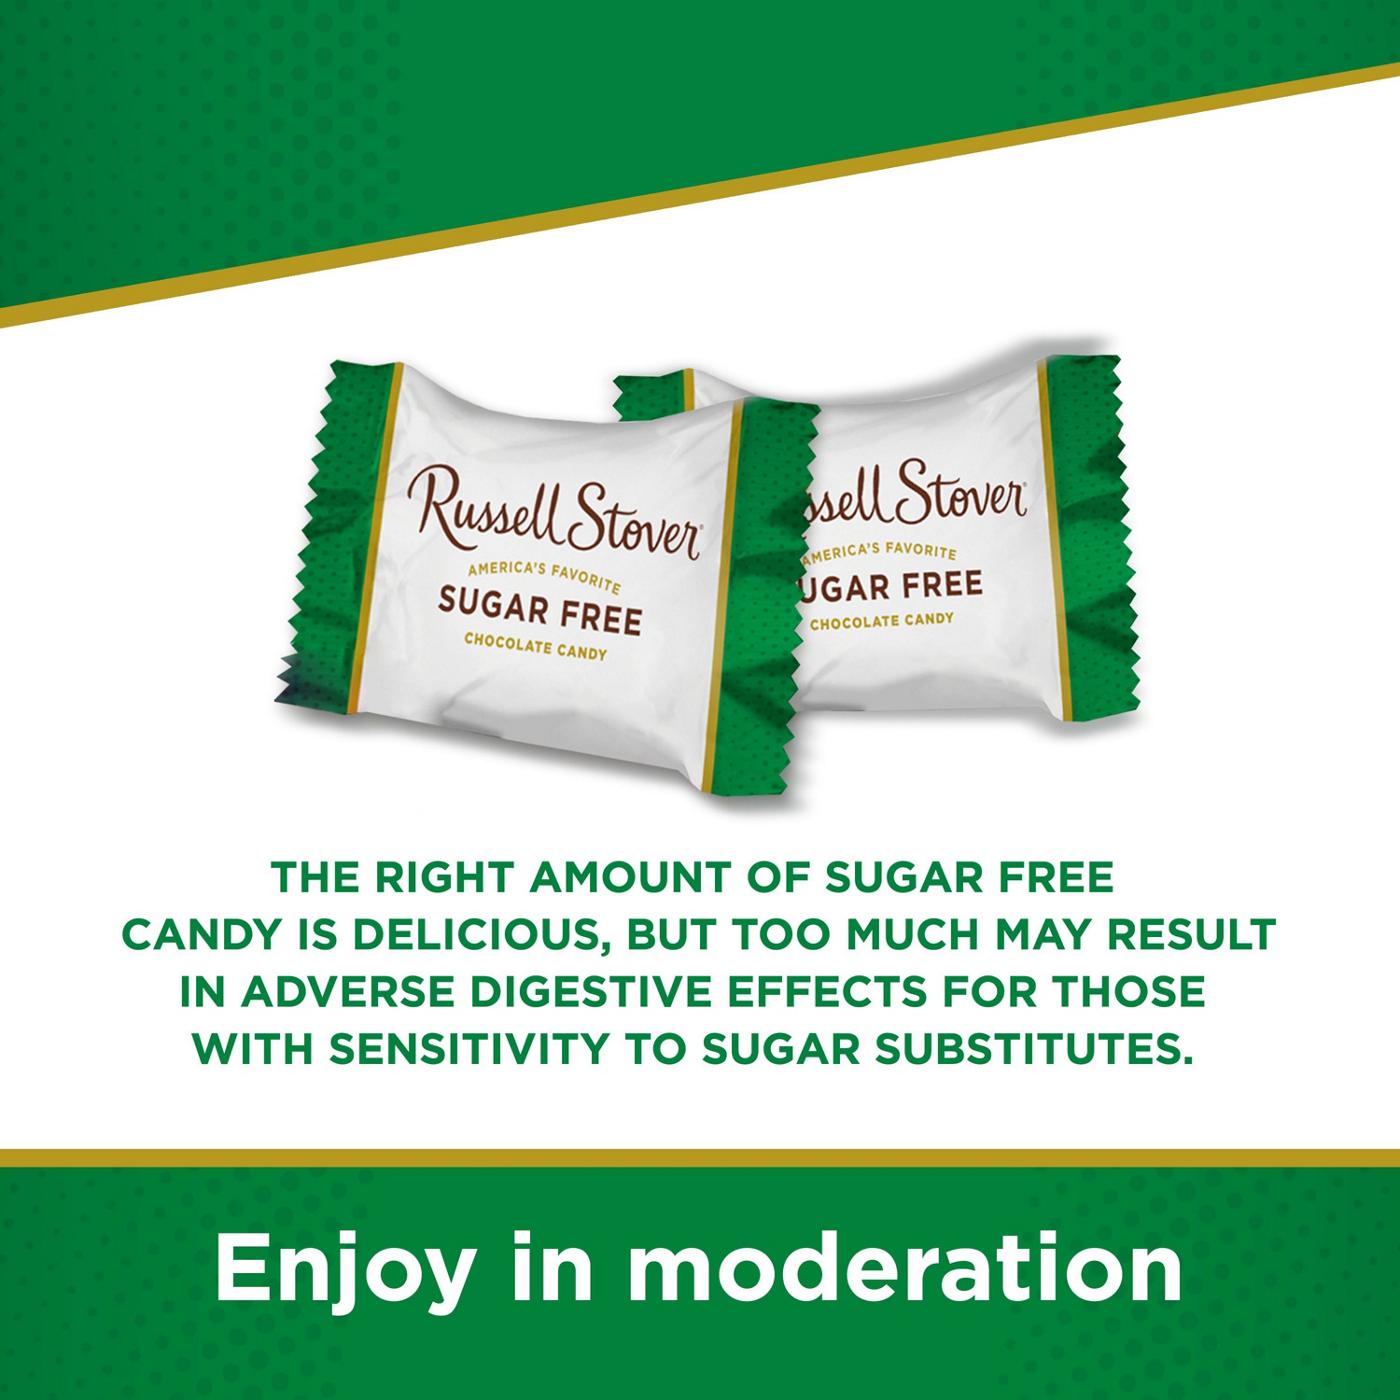 Russell Stover Sugar Free Coconut Chocolate Candy; image 6 of 8